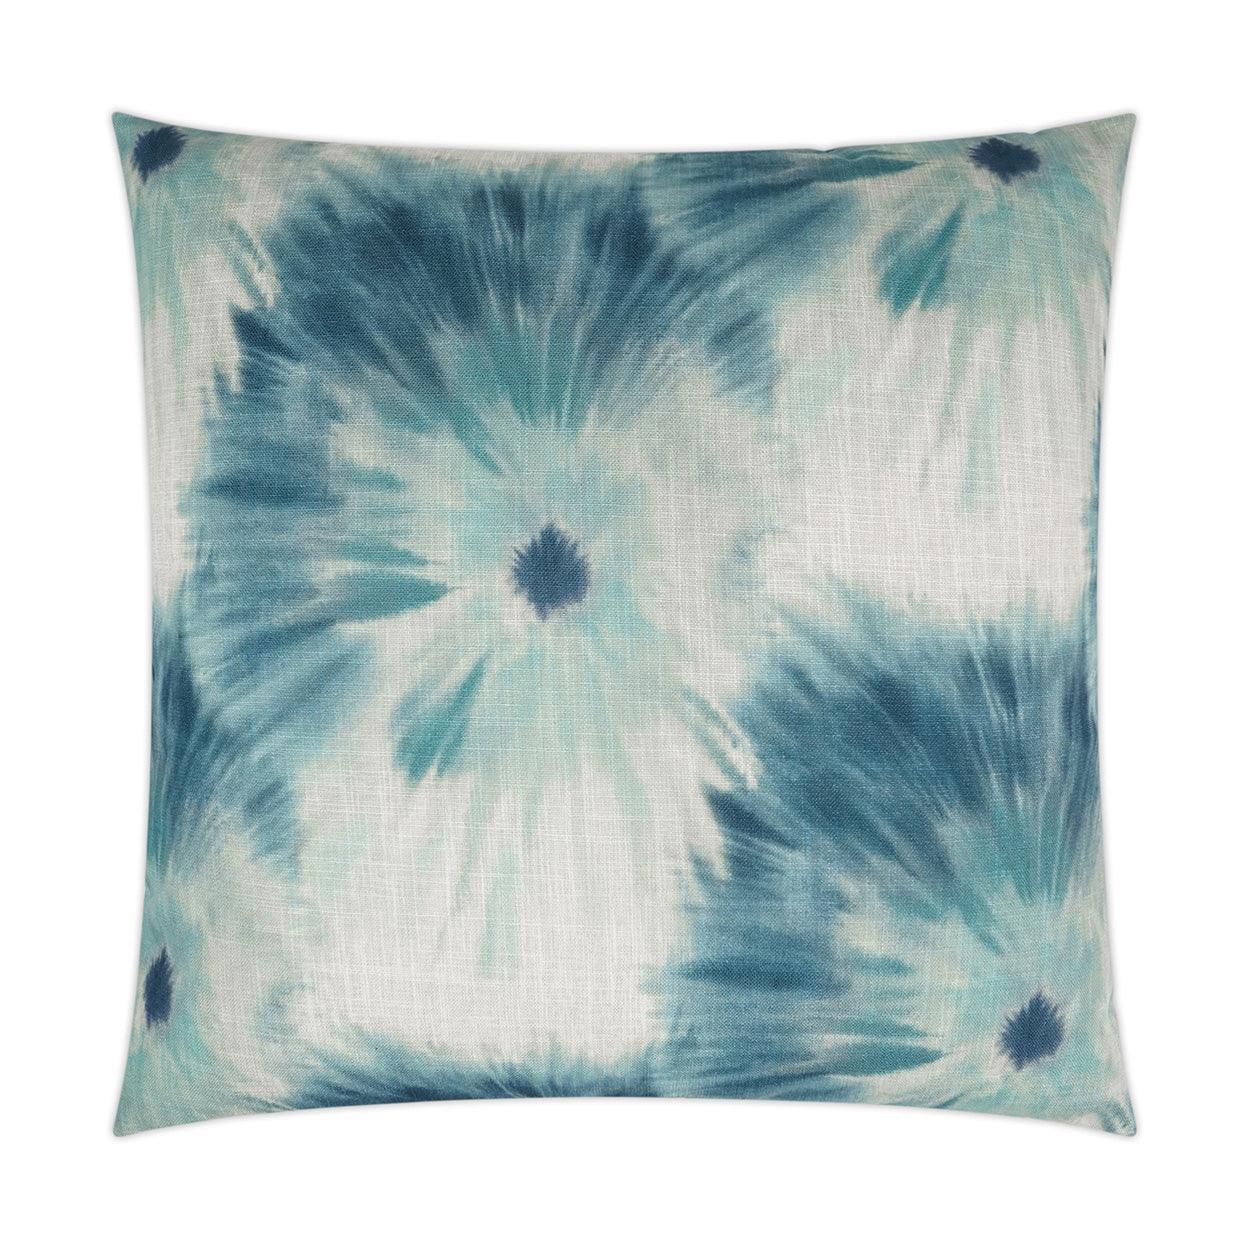 Idyll Abstract Floral Blue Large Throw Pillow With Insert - Uptown Sebastian